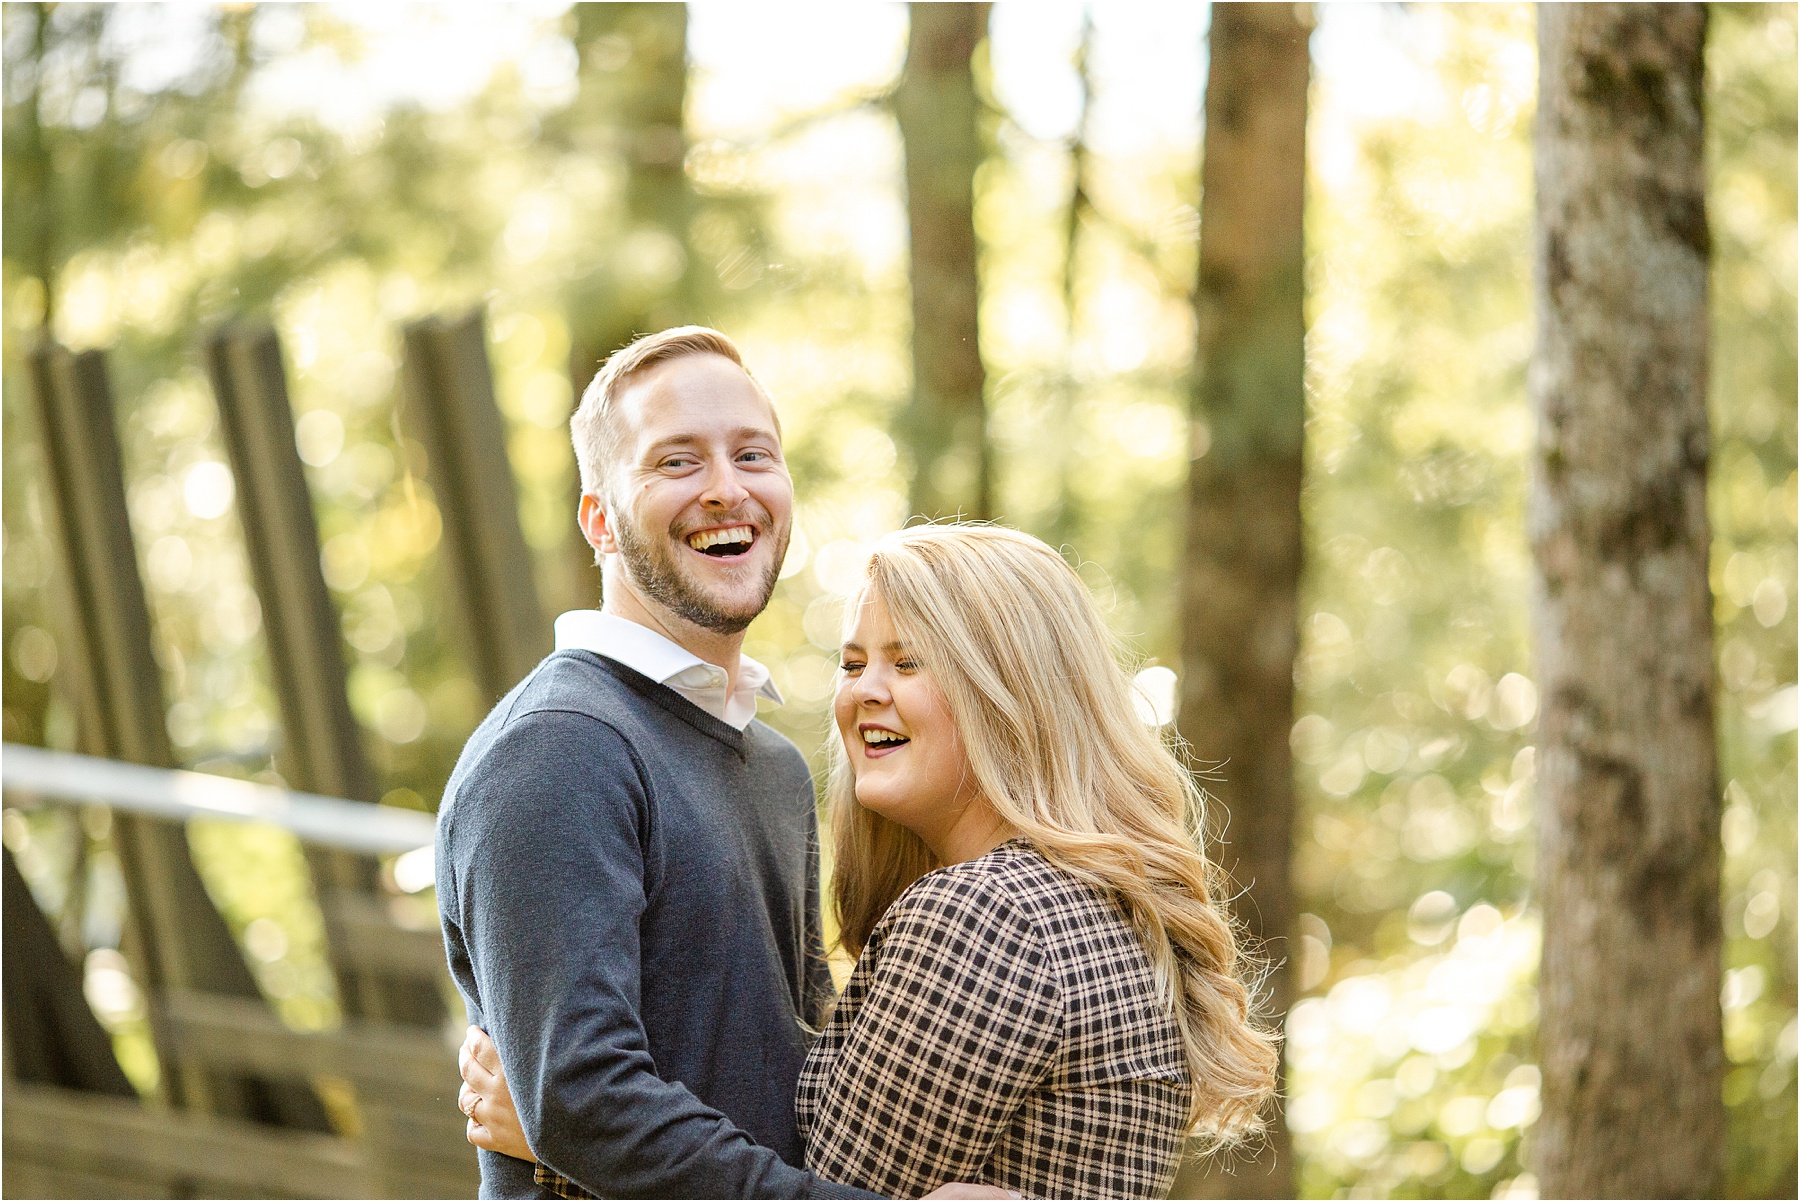 Guy and girl laughing in the woods dressed for engagement pictures